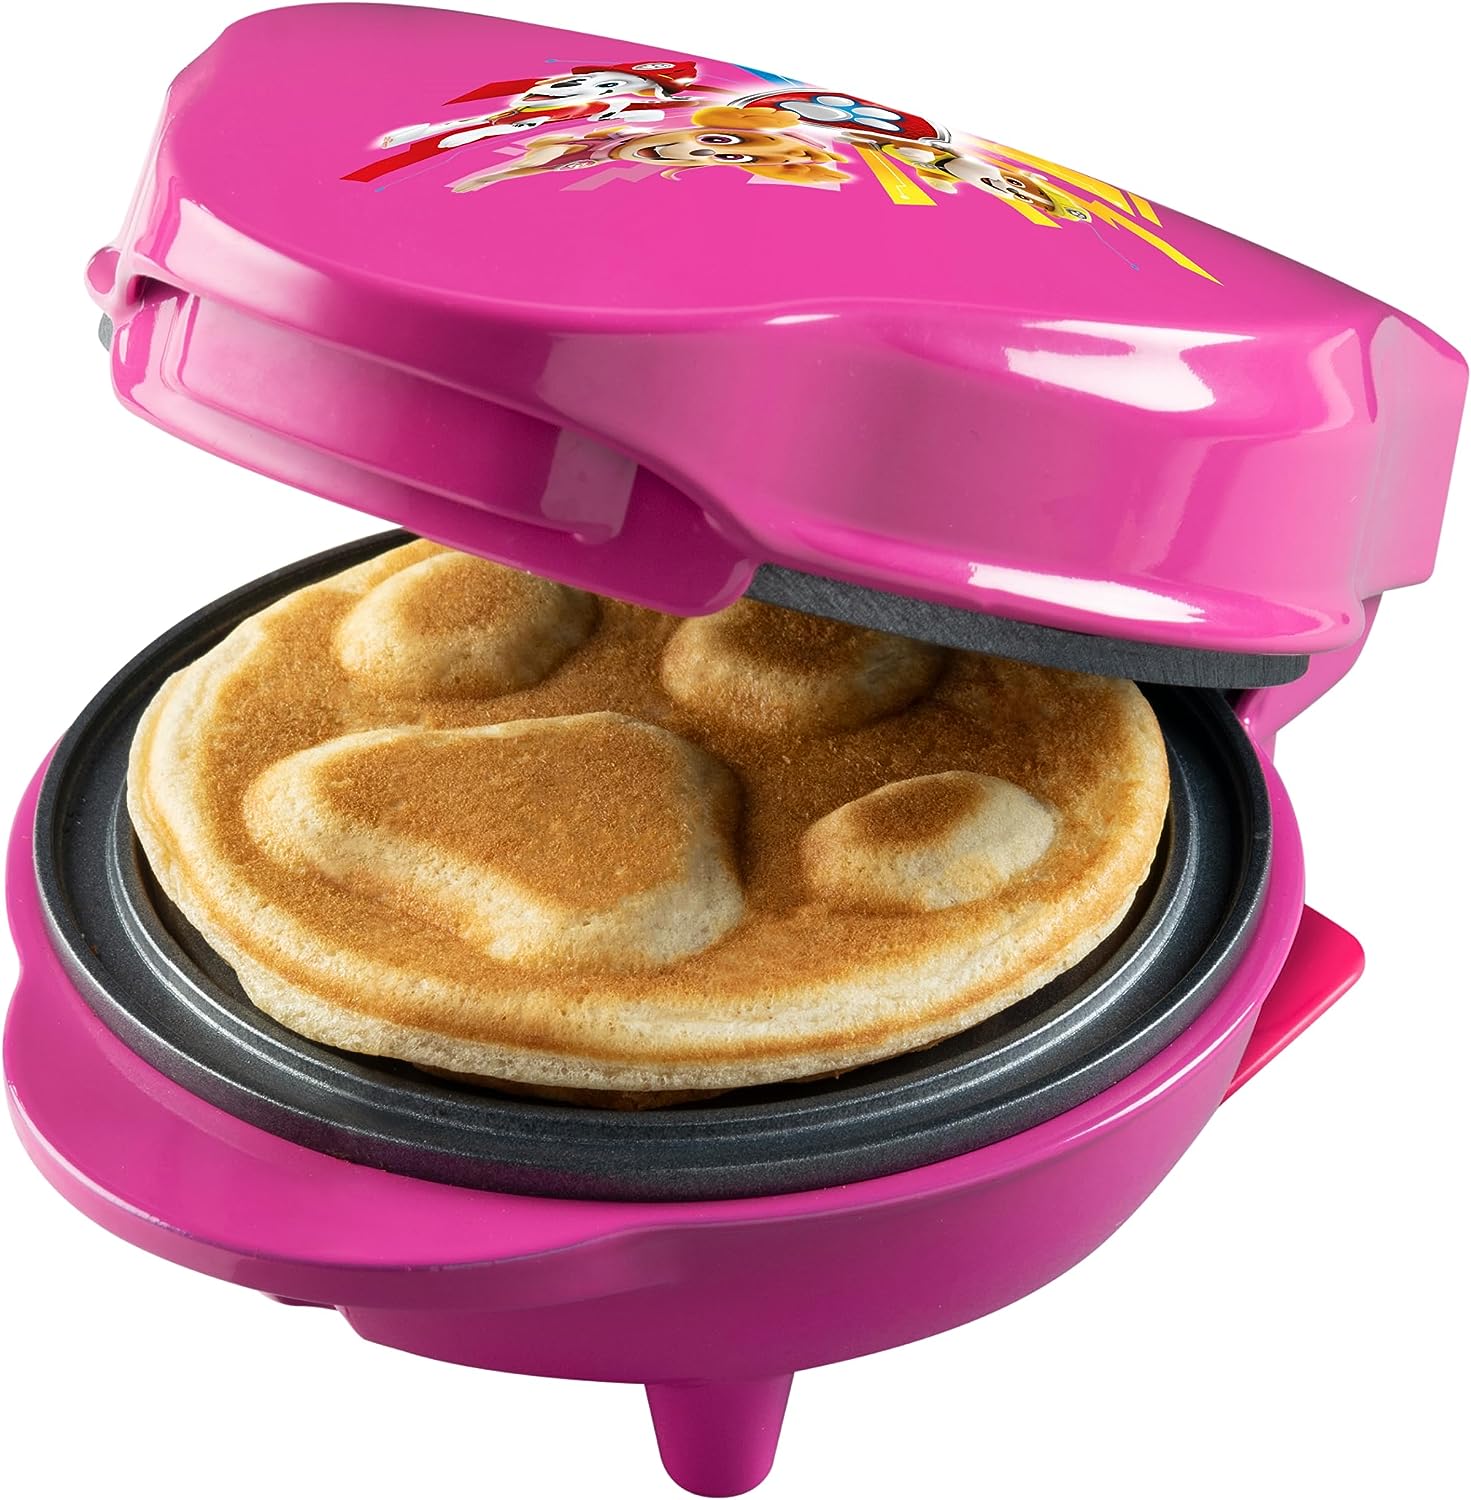 Paw Patrol Waffle Iron, Mini Waffle Iron in Unique Paw Patrol Design, for Children\'s Birthdays, Easter and Christmas, Includes Baking Light, Waffle Size: Diameter 10 cm, Officially Licensed Product, Colour: Pink